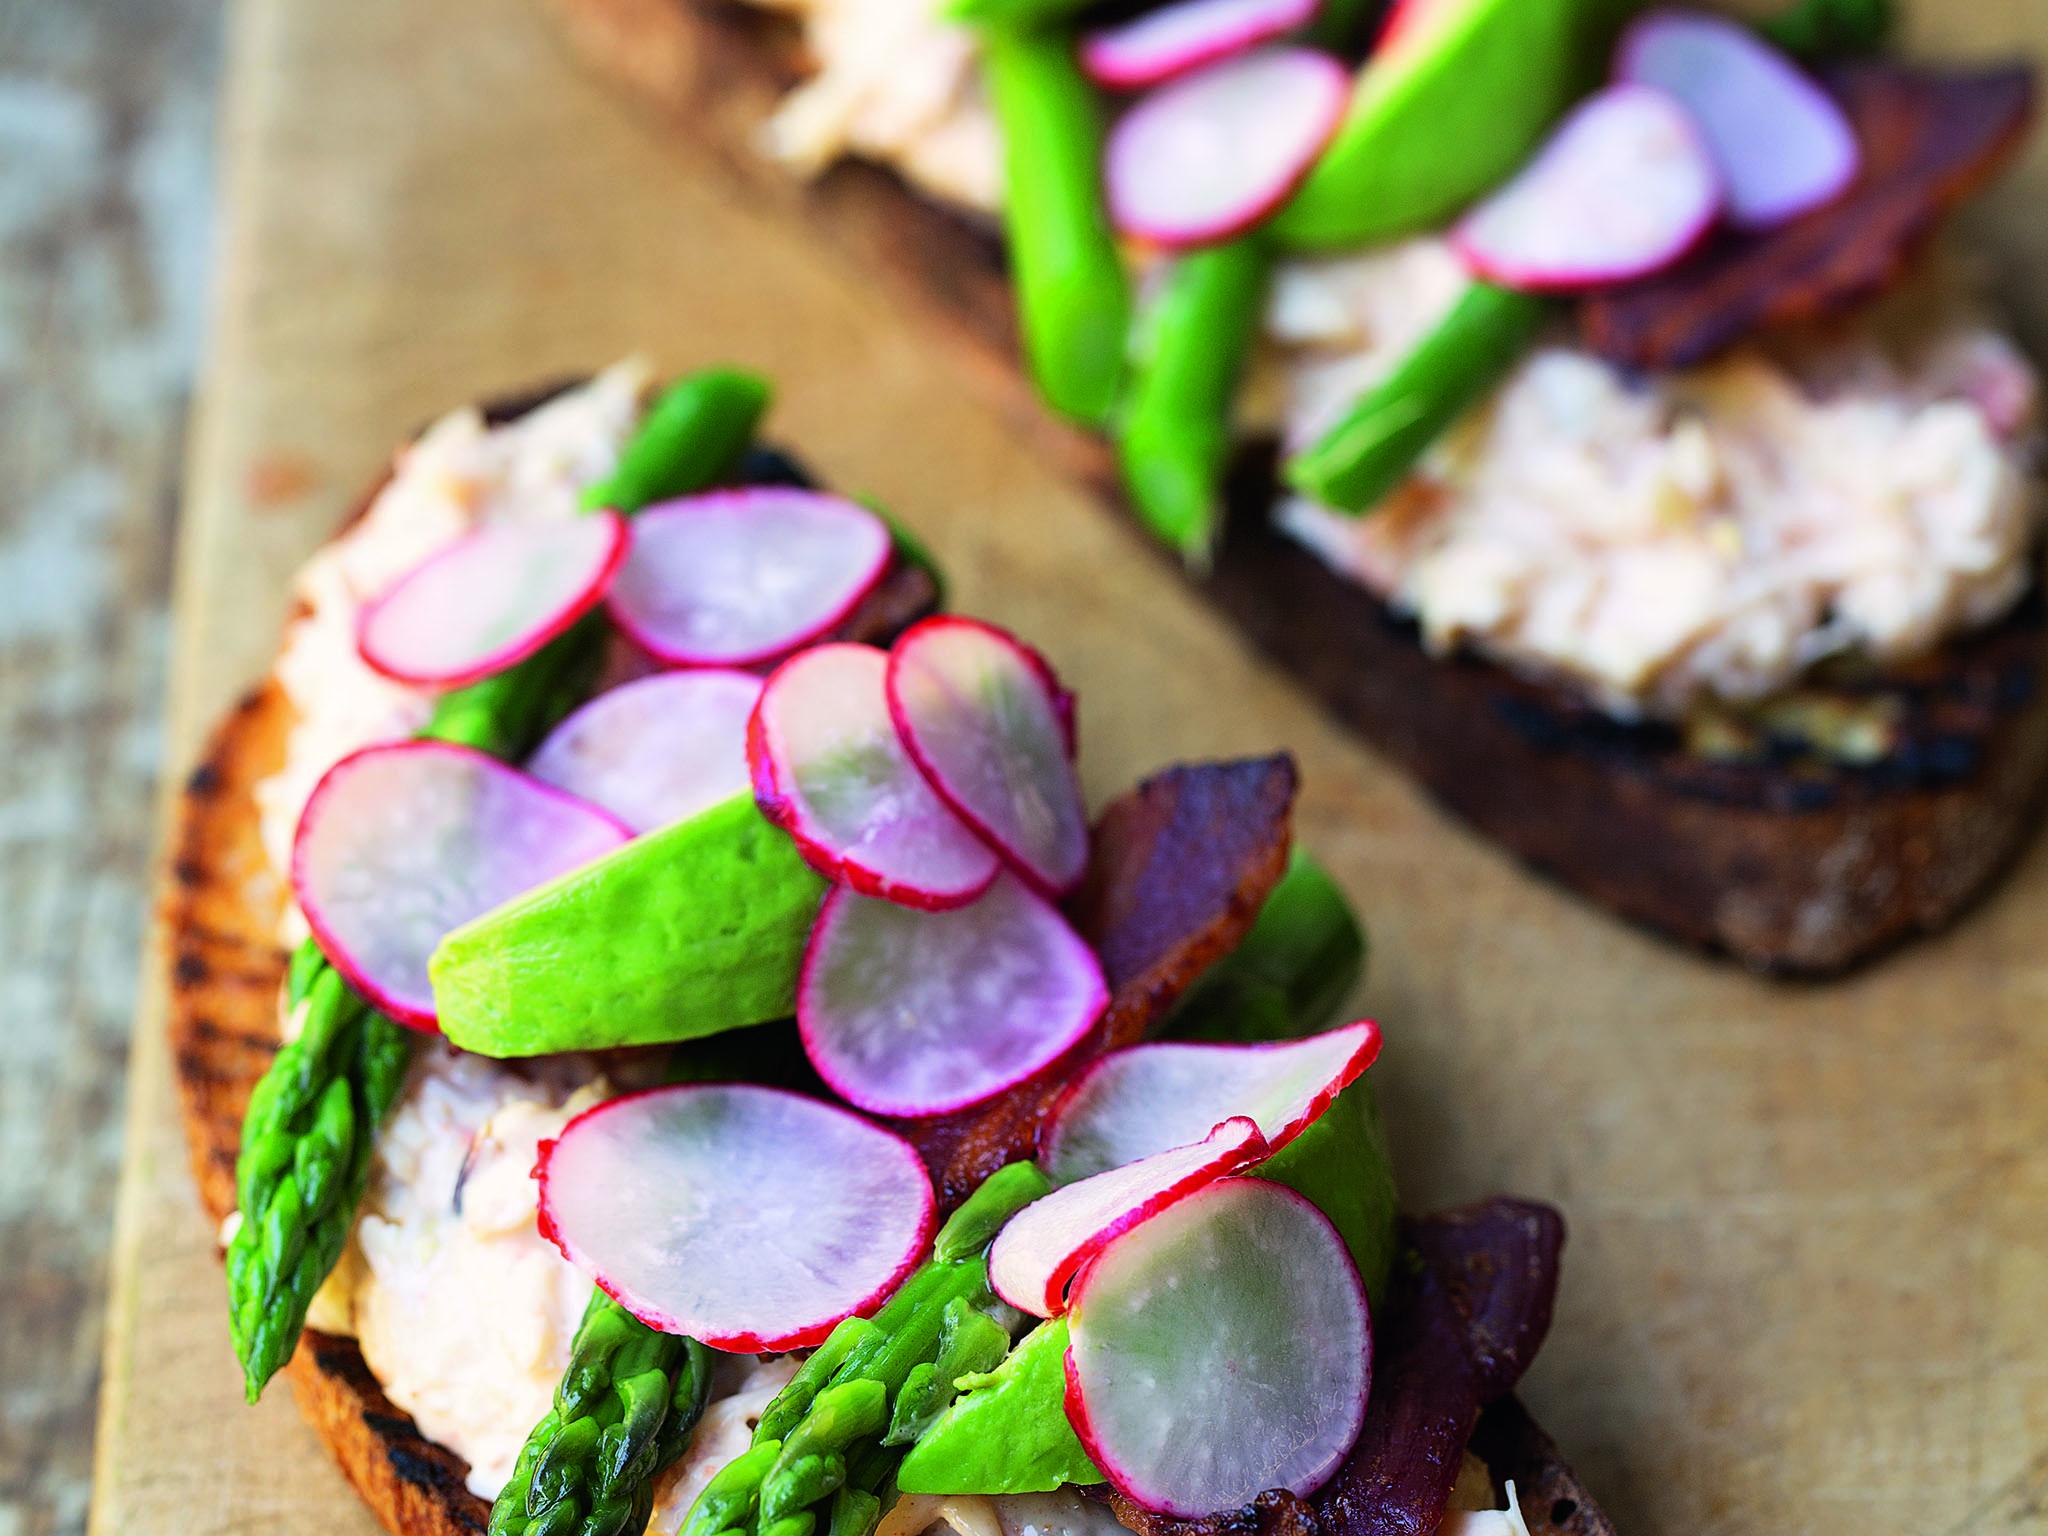 Scandi-style open sandwiches are extremely versatile – just be sure to include a bit of crunch